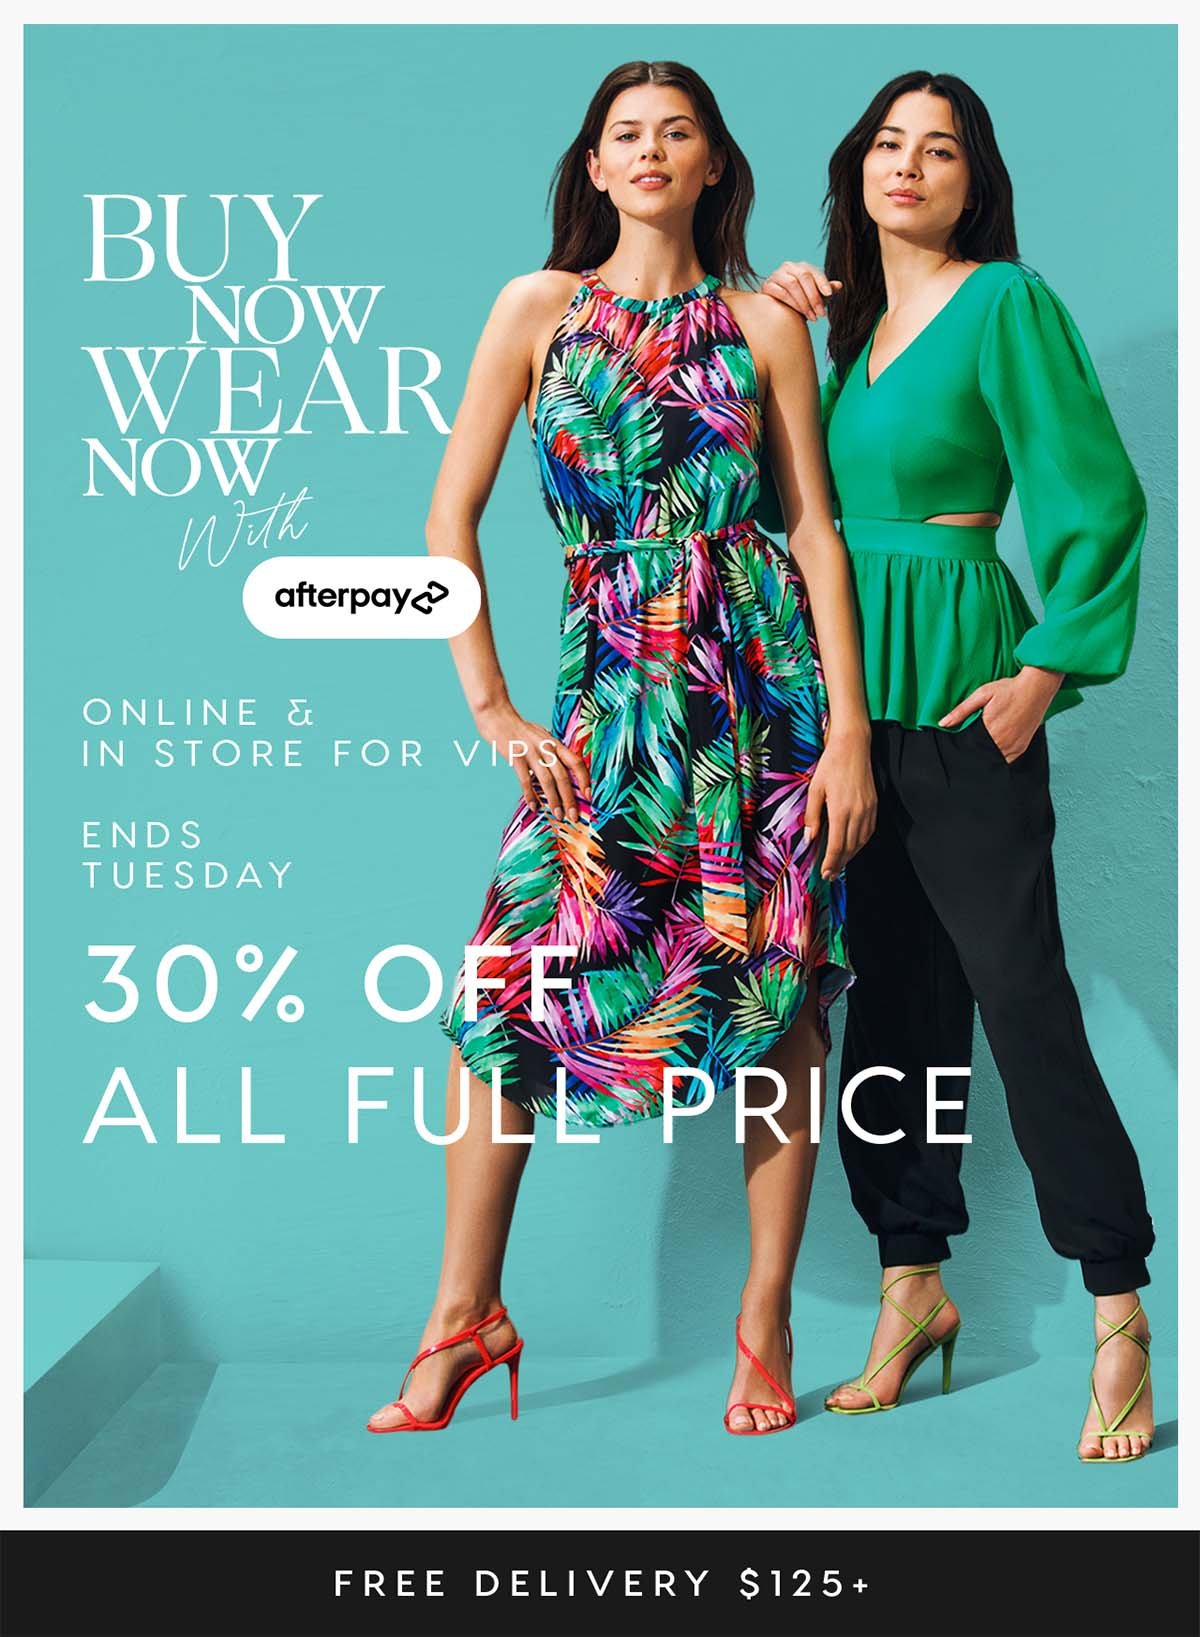 Buy Now, Wear Later with Afterpay. Online & In Store for VIPs. 30% Off All Full Price. Free Delivery $125+